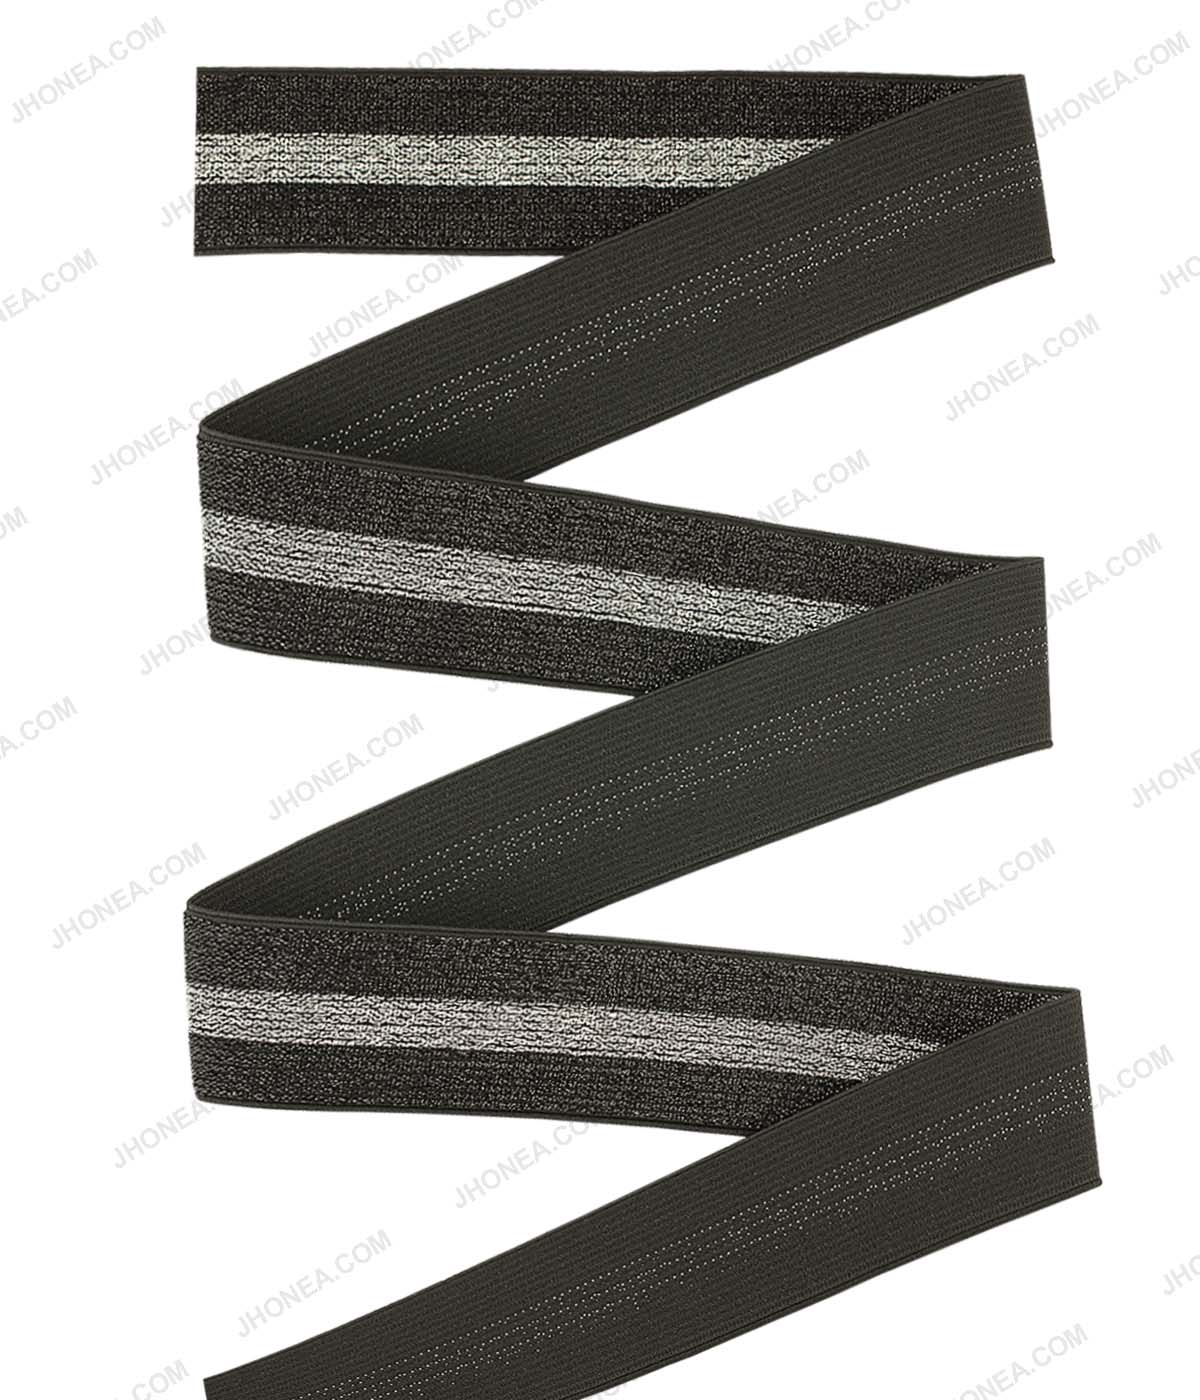 Shiny Metallic 1.5inch wide Fancy Lurex Knit Elastic for Party Wear in Black with Silver Color